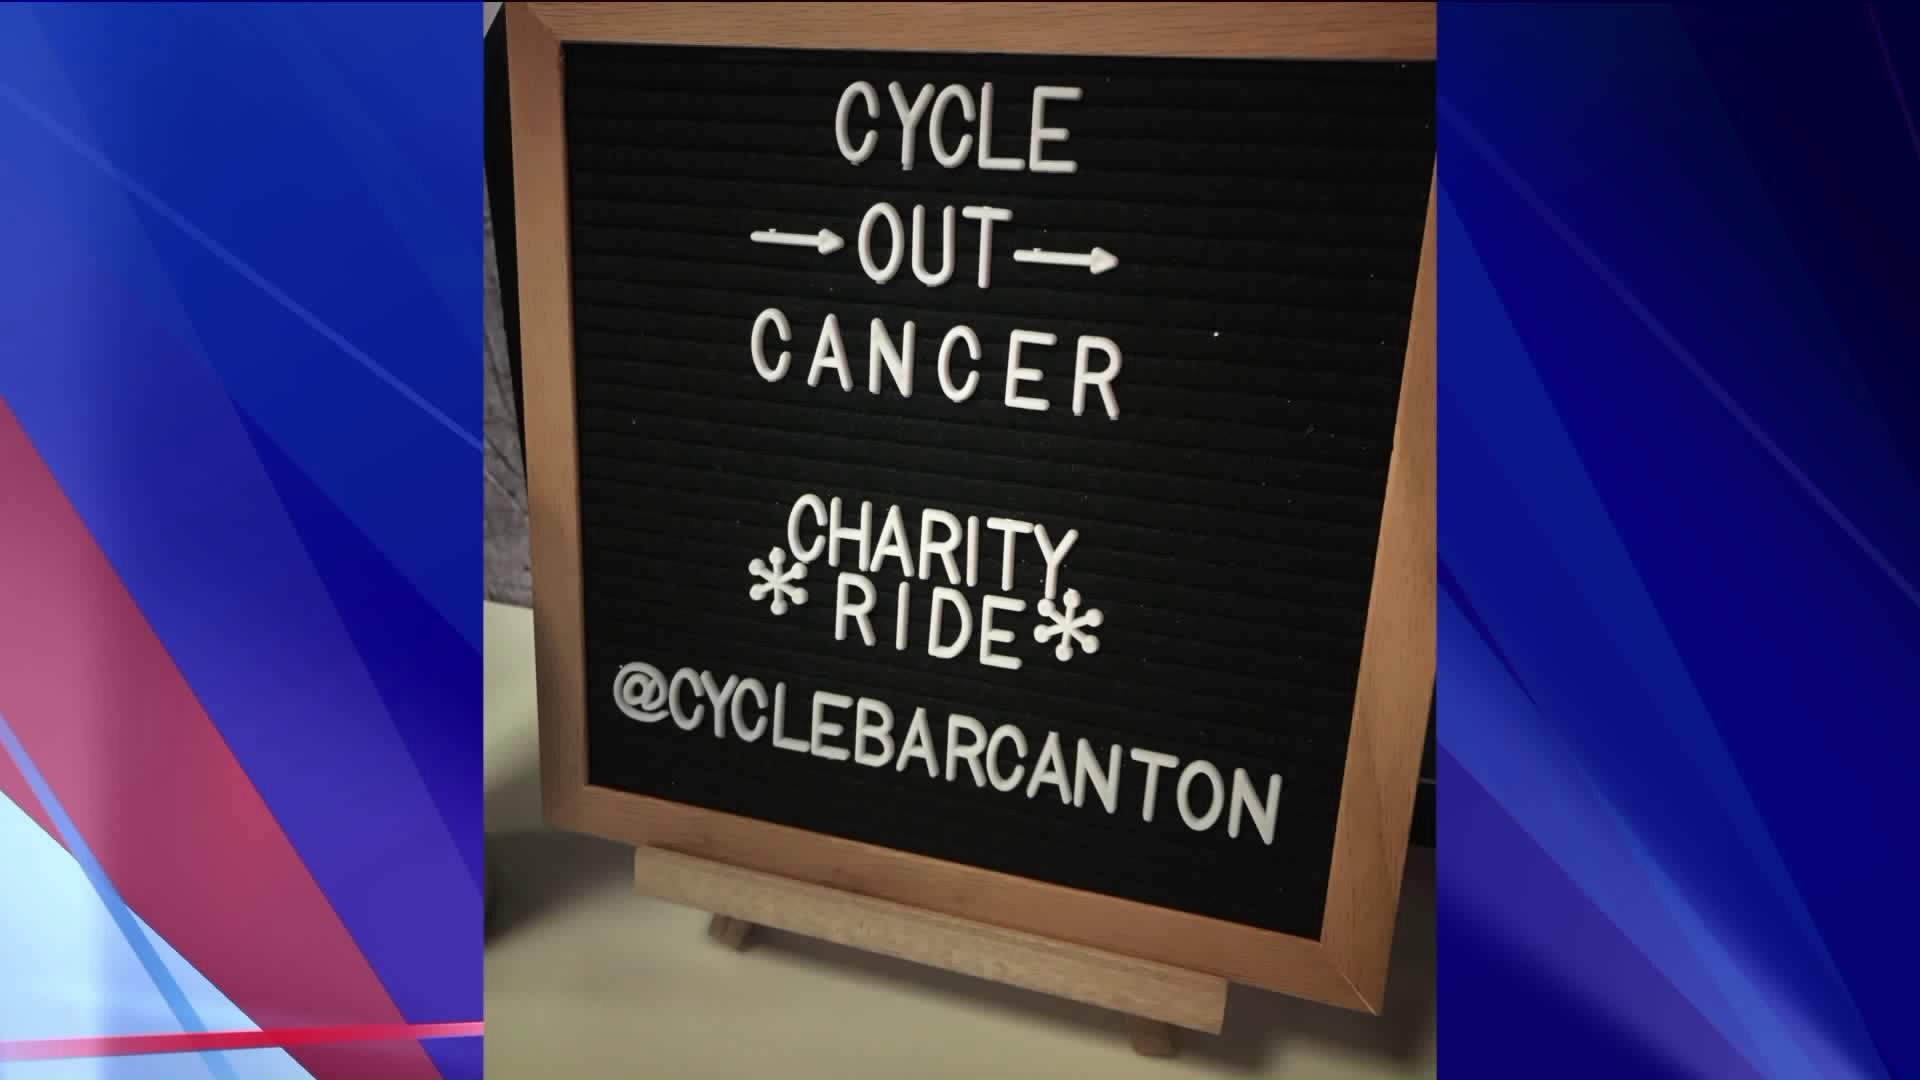 Cycle out Cancer update